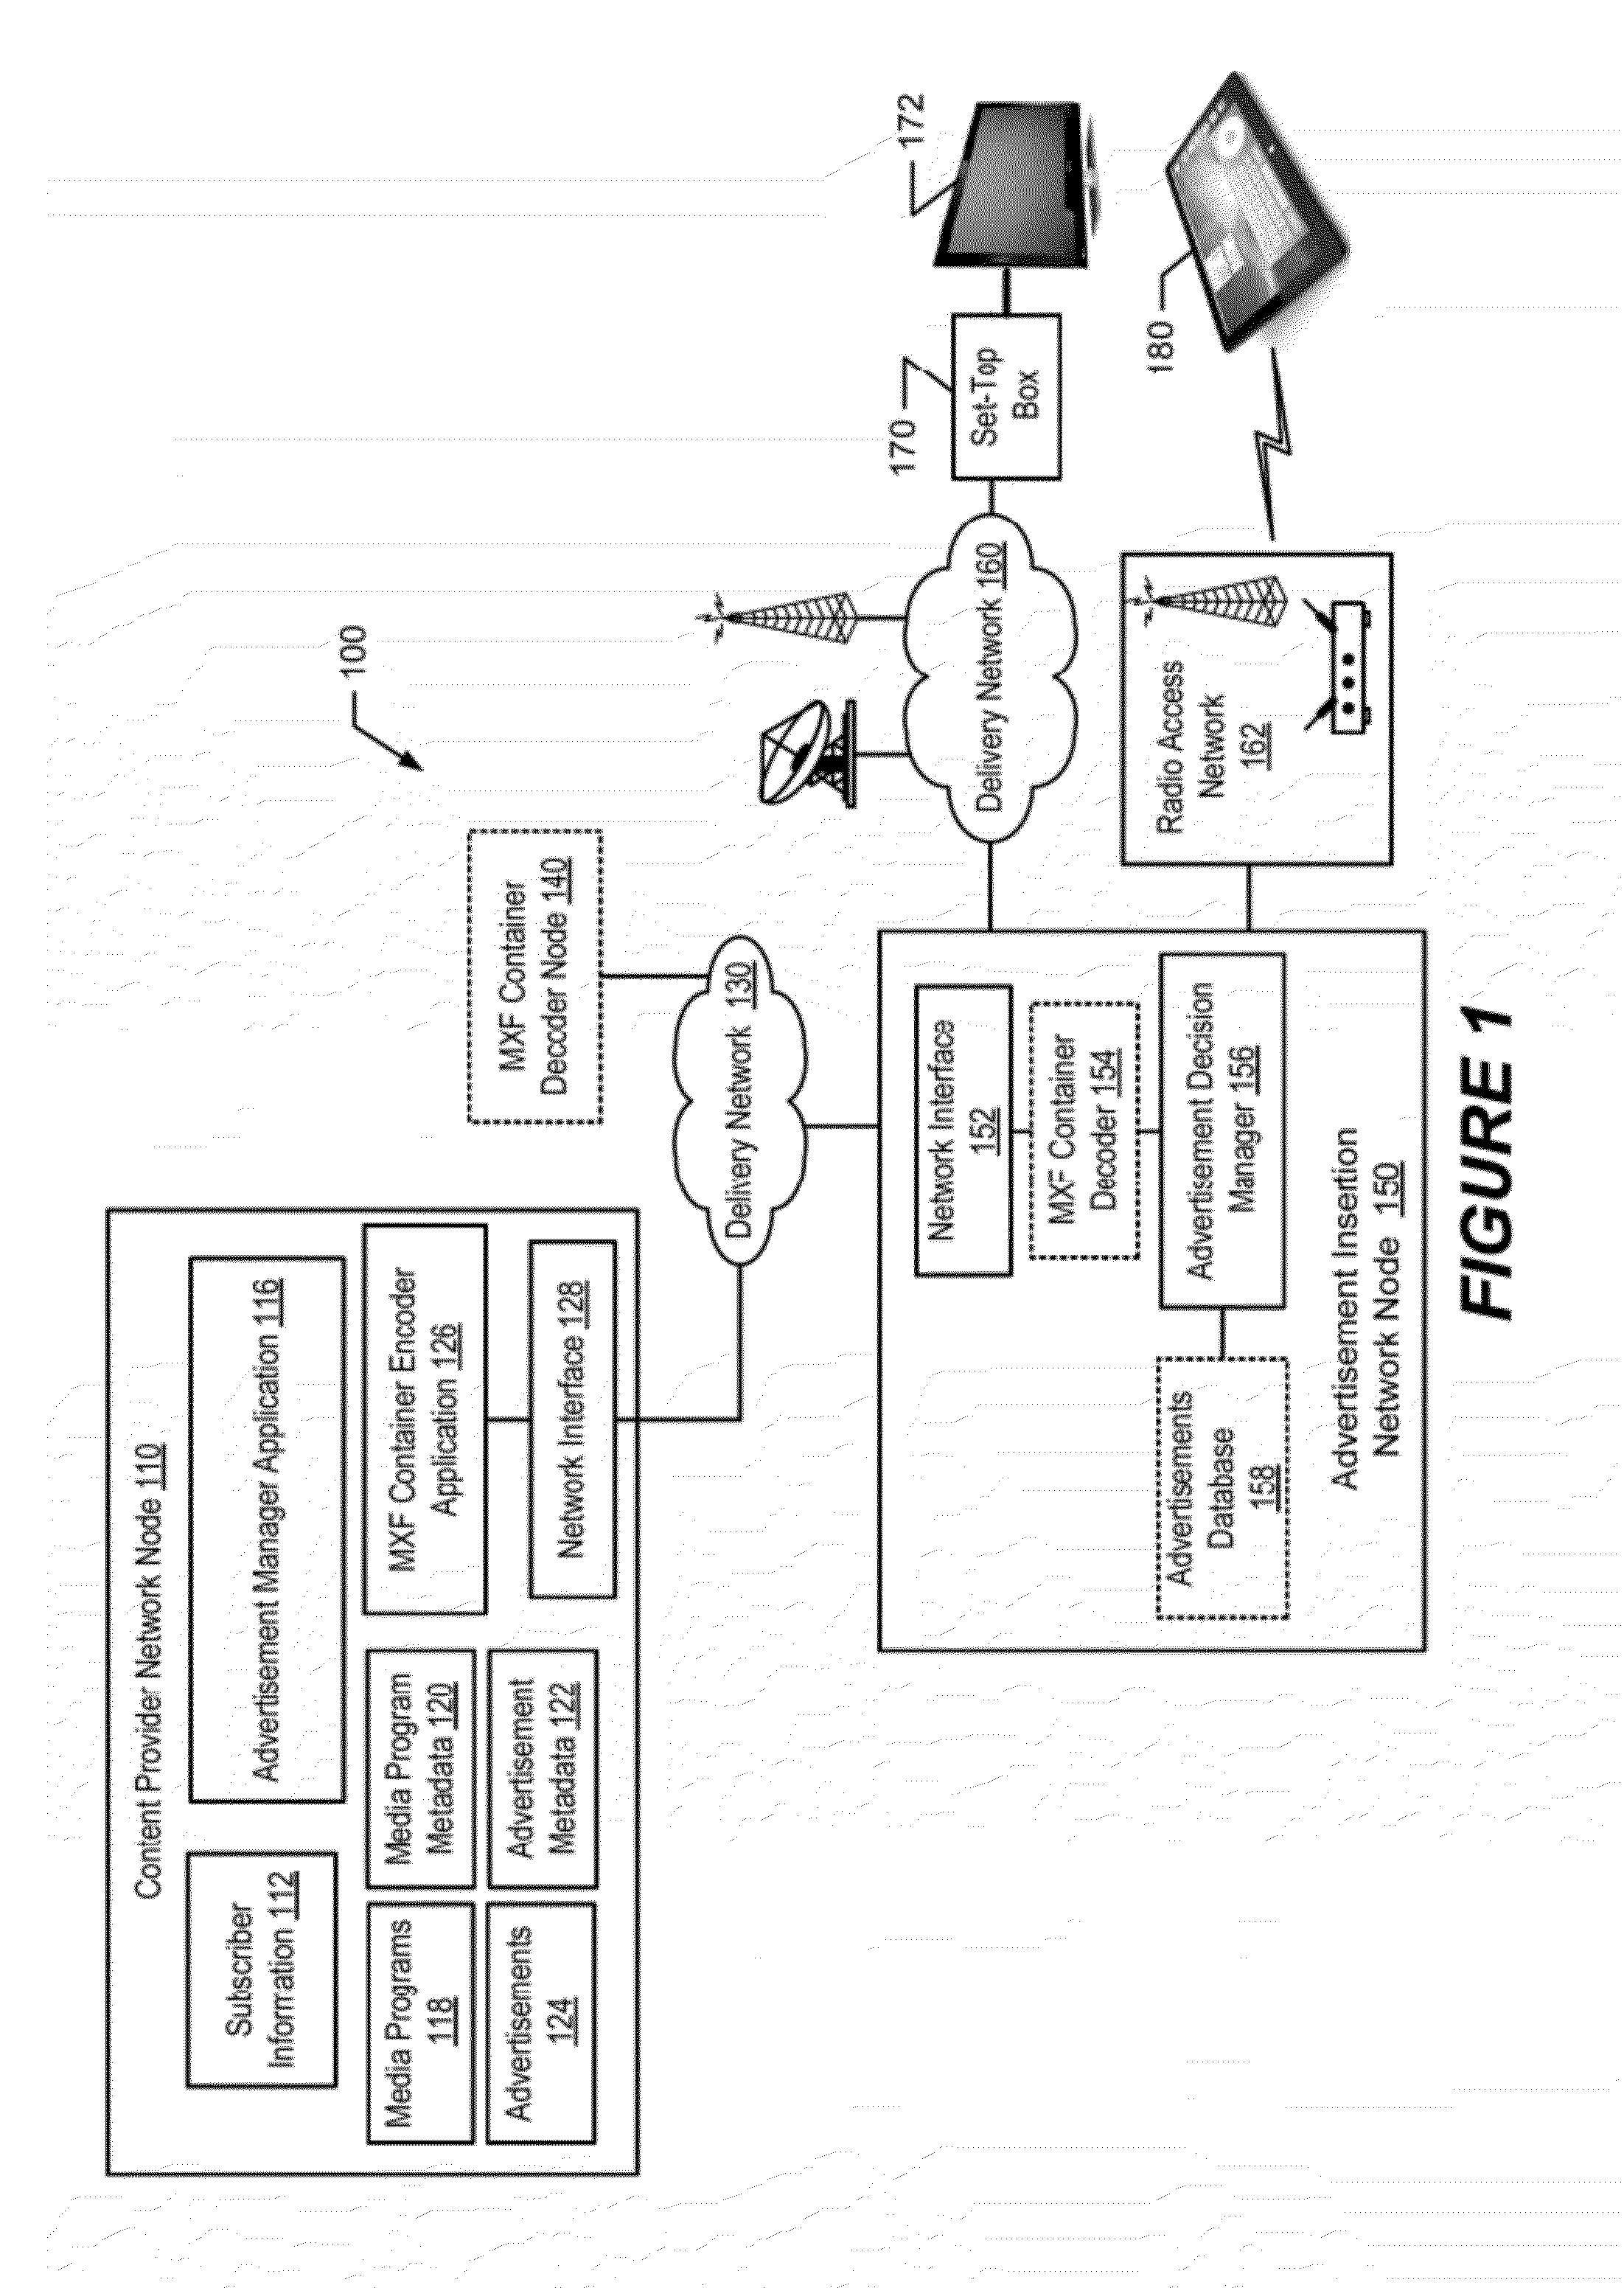 Transporting media programs, advertisement metadata, and advertisement selection code through data transport containers for use by an advertisement insertion node